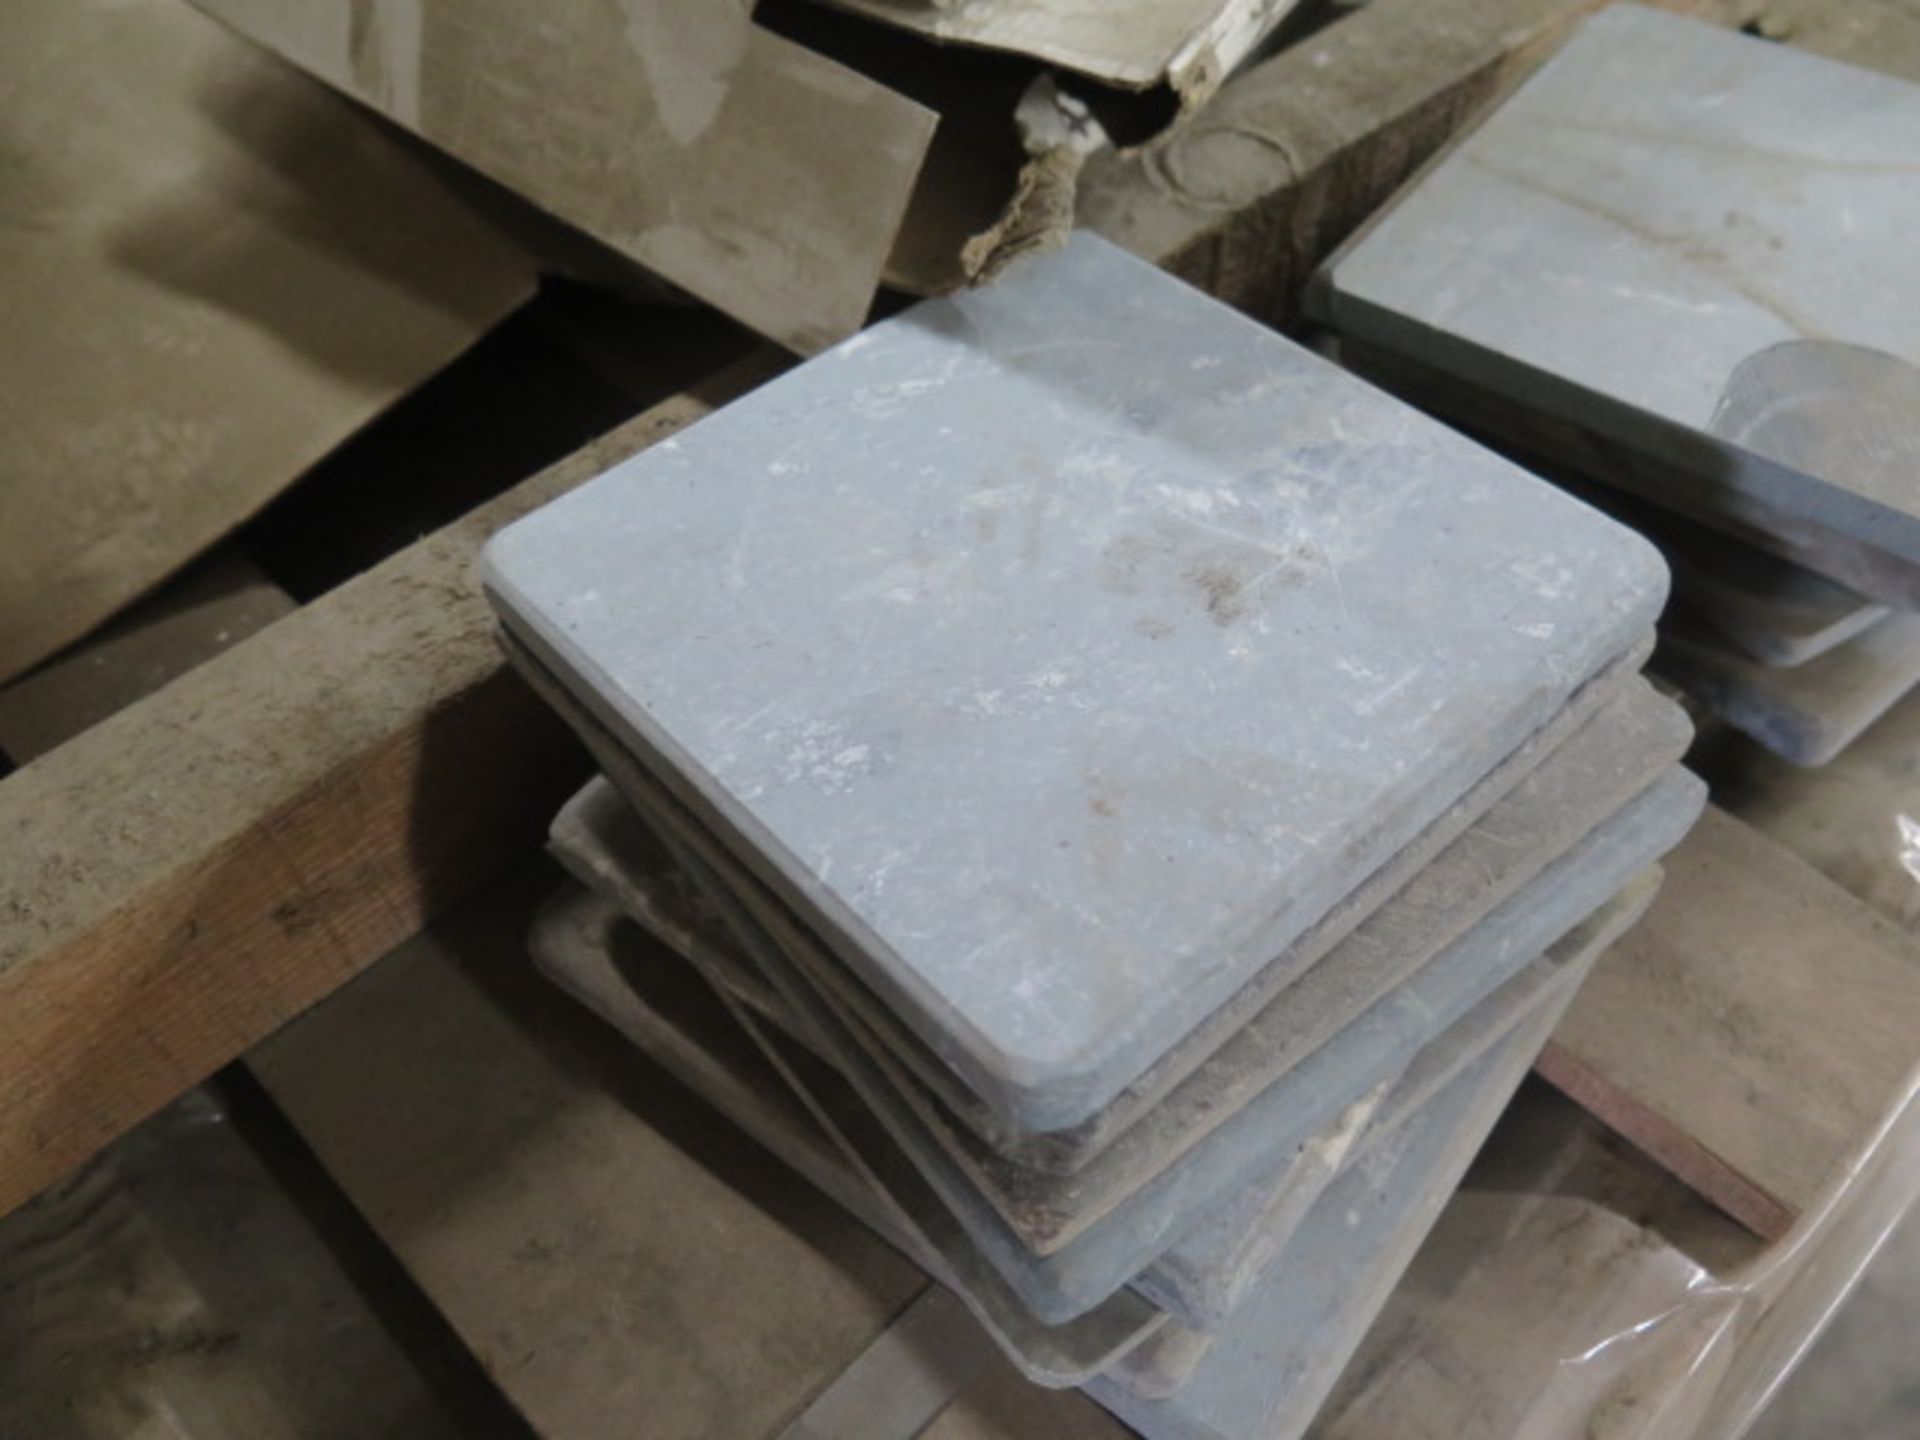 Hulian Jade Marble 6" x 6" Antique Tiles (3 Pallets) (SOLD AS-IS - NO WARRANTY) - Image 8 of 9